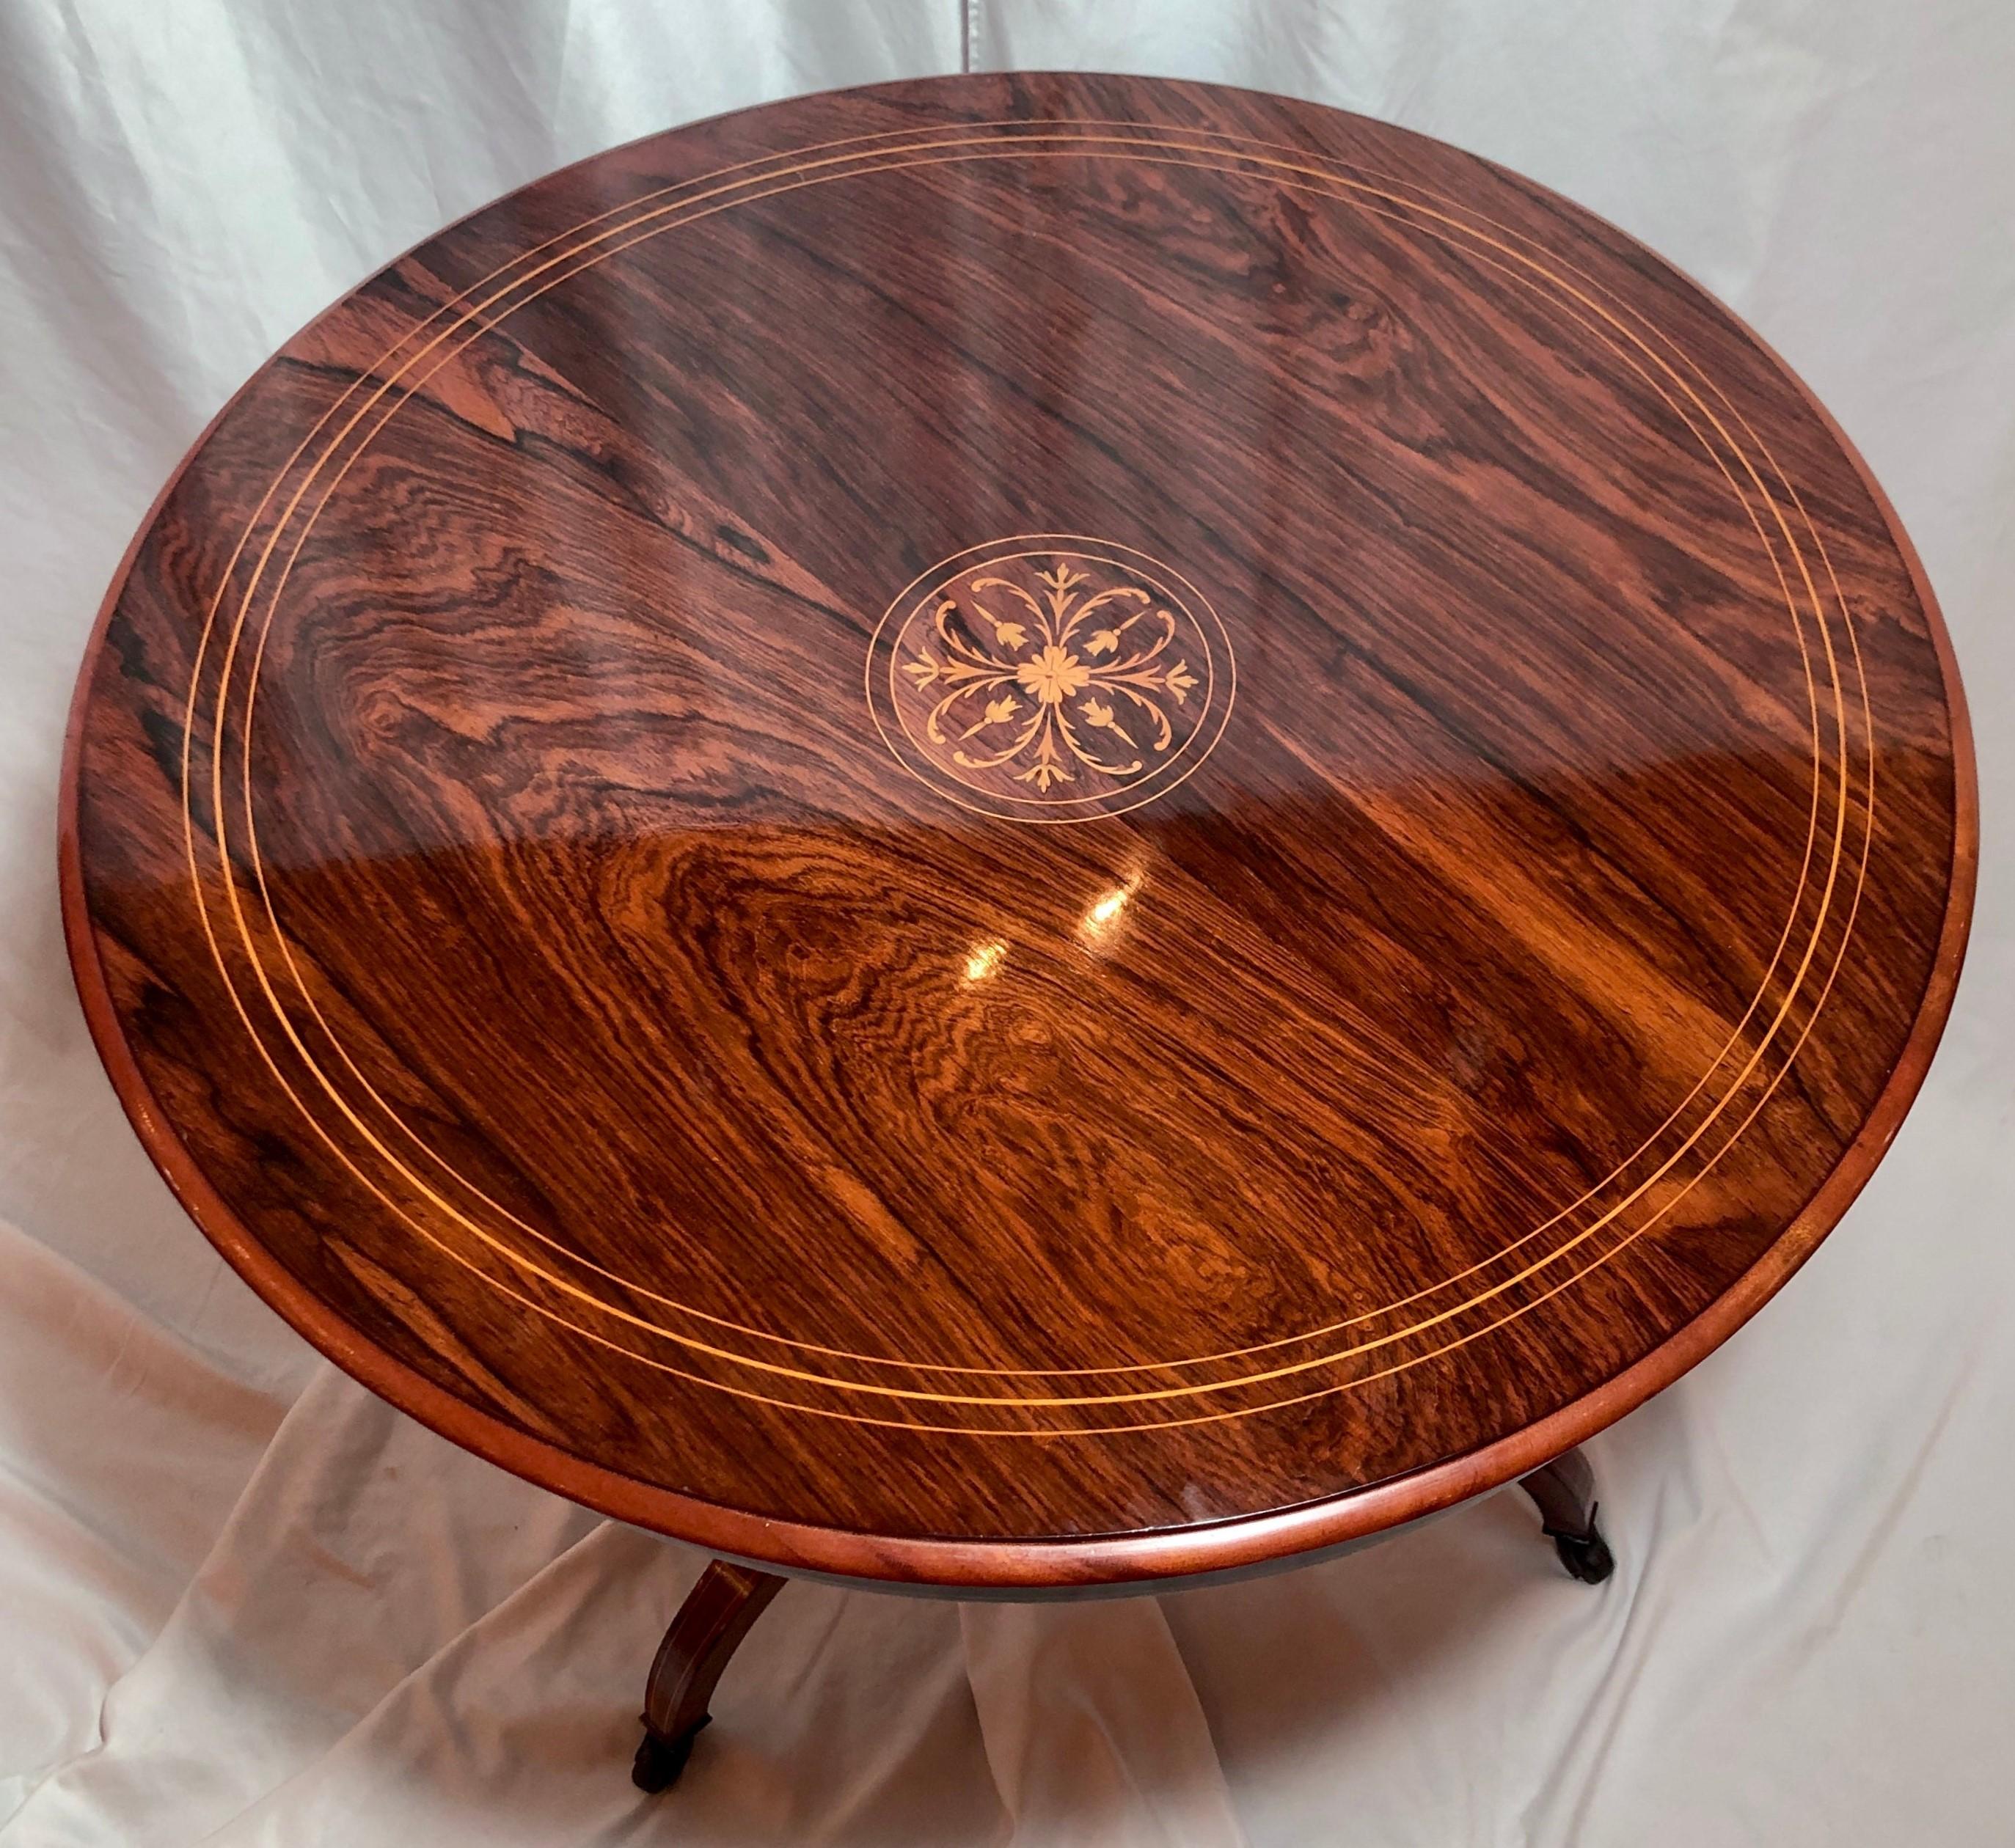 Antique English Victorian Rosewood Table with Inlay, Circa 1860- 1870 In Good Condition For Sale In New Orleans, LA